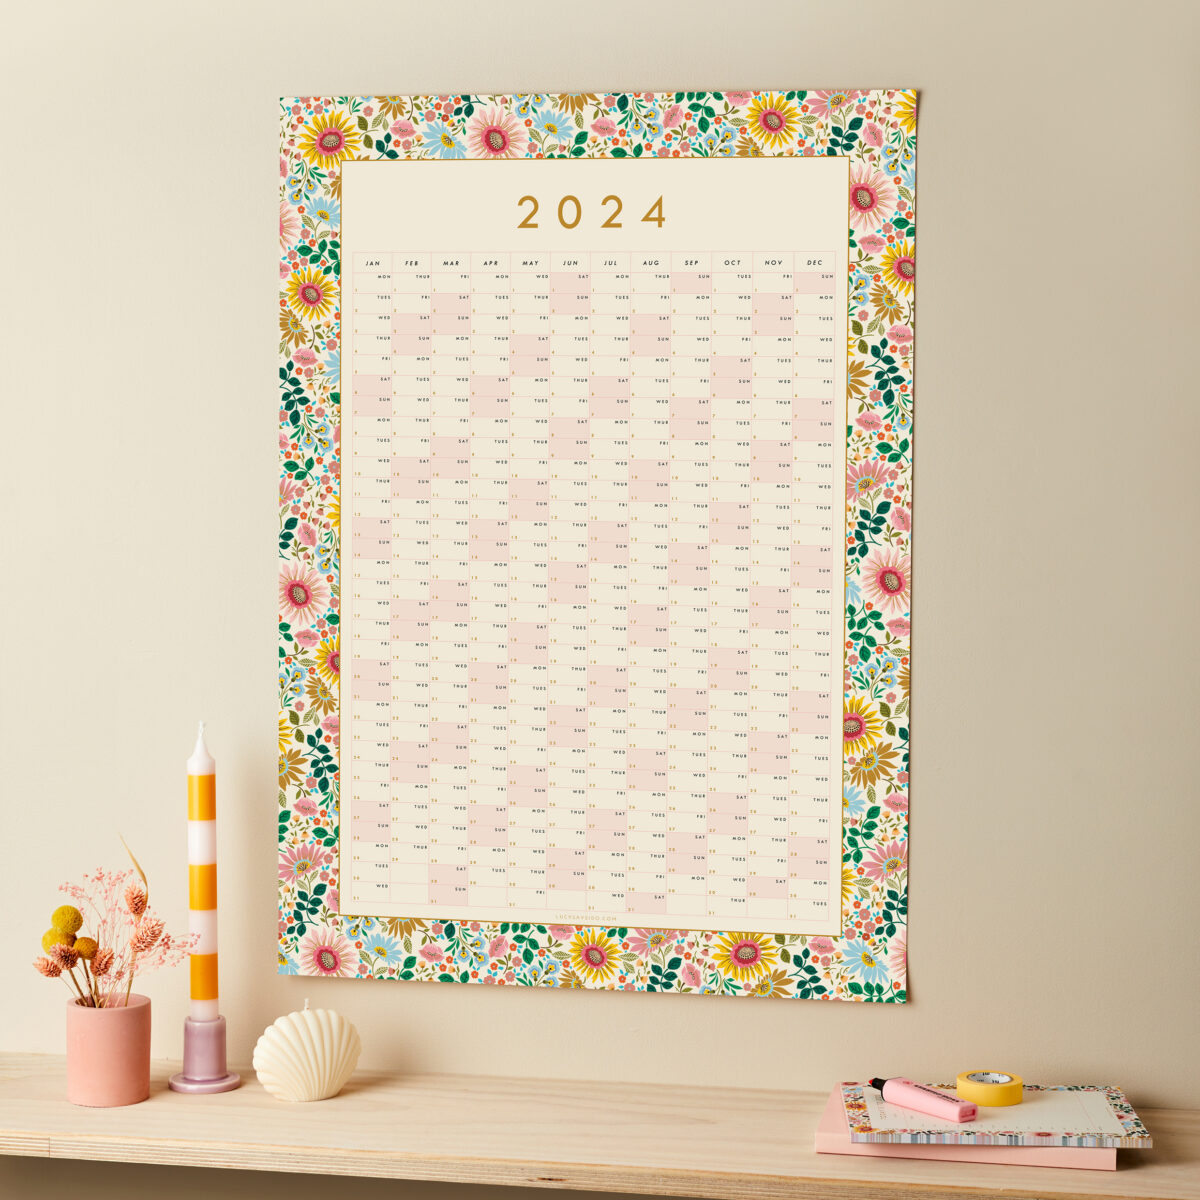 2024 year planner for the wall bright floral design